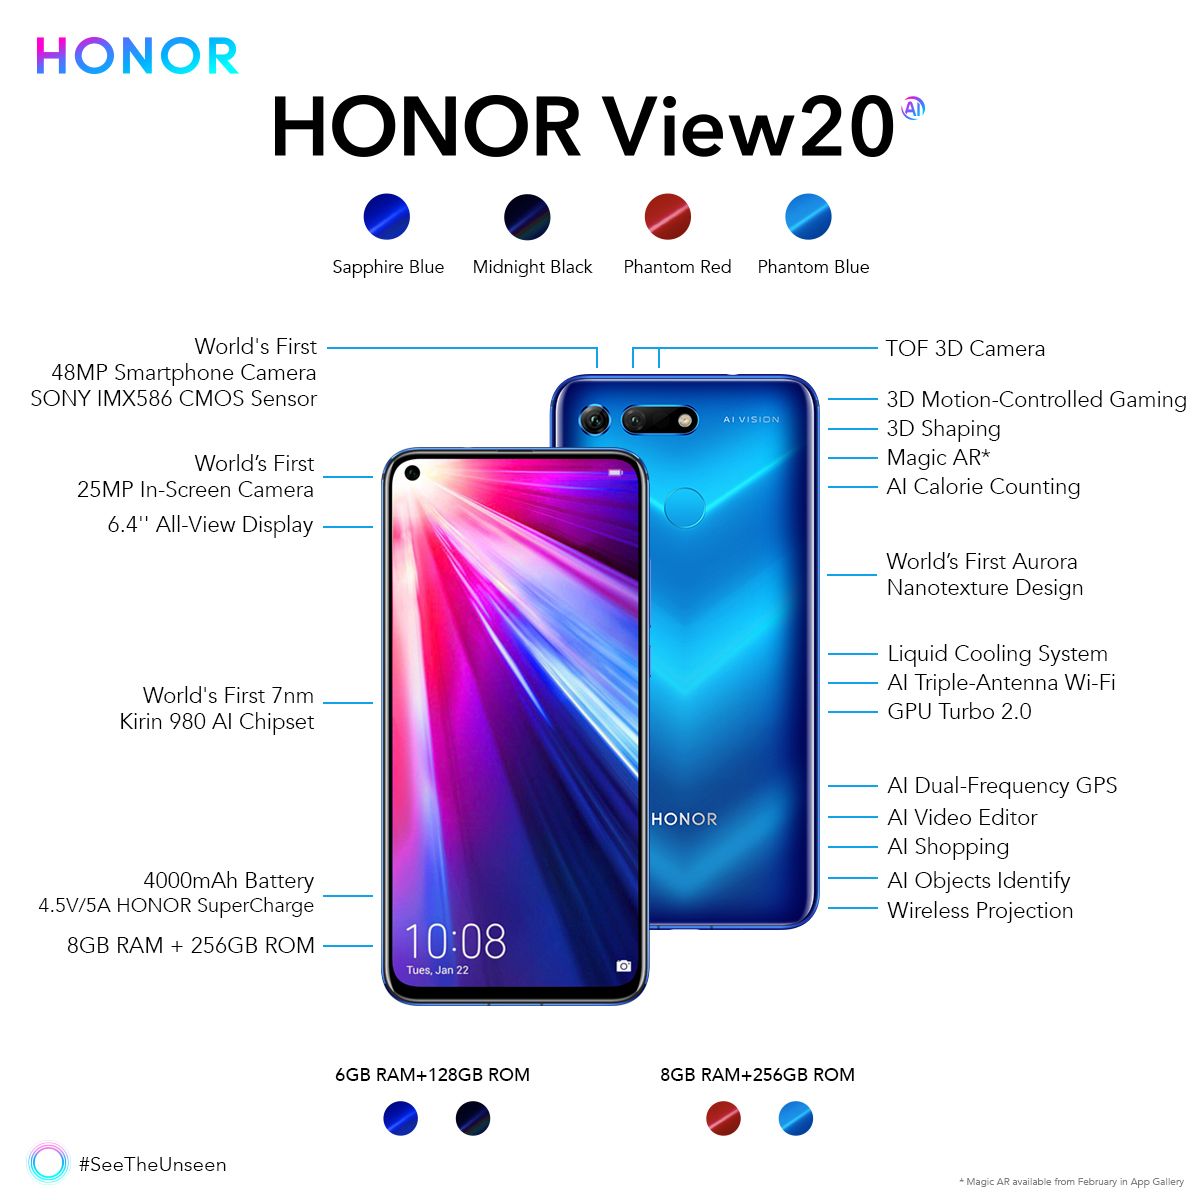 HONOR View20_ALL KSP POST Without Price_20190122.jpg